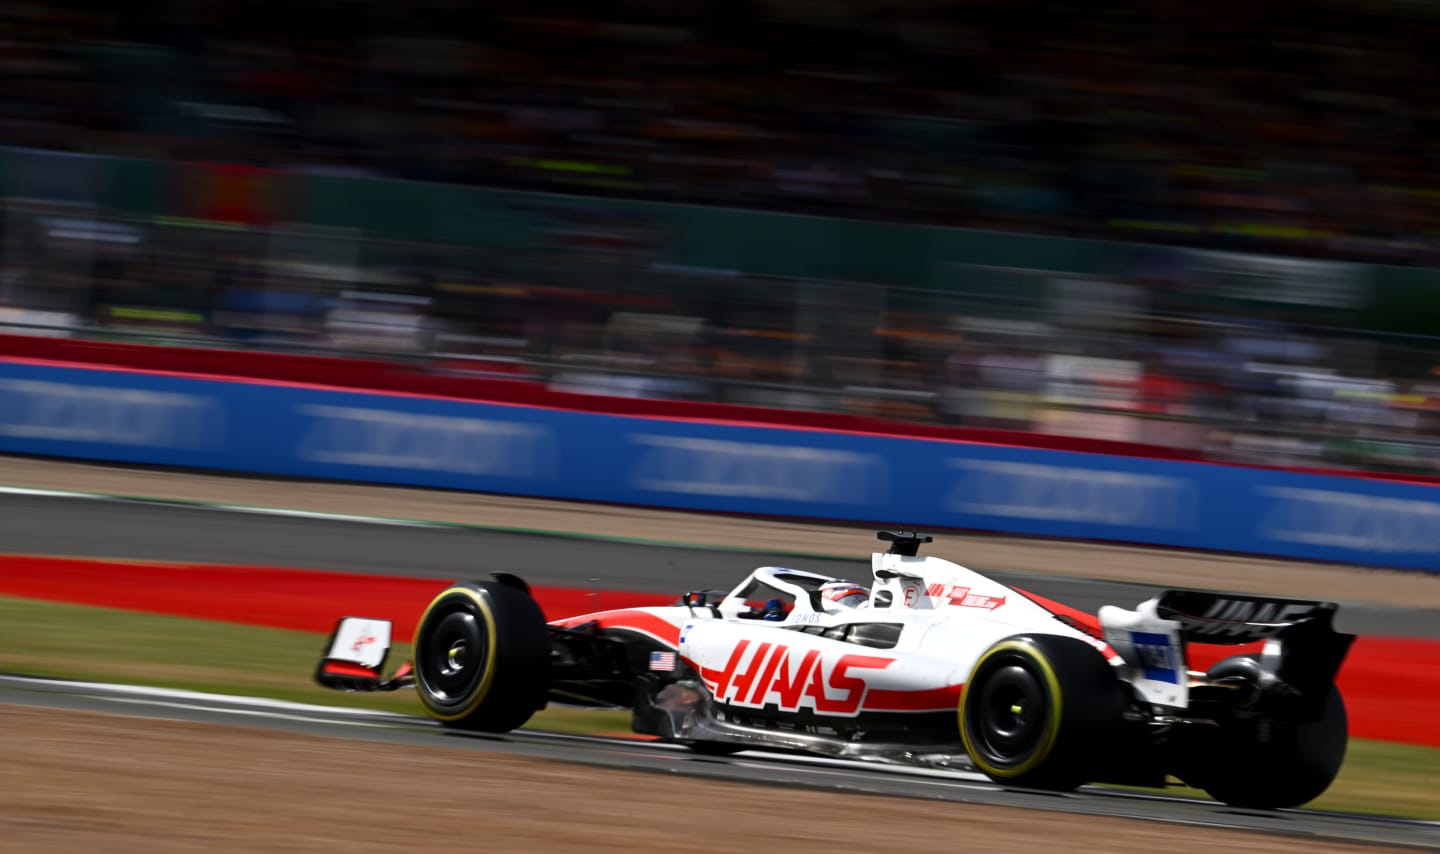 NORTHAMPTON, ENGLAND - JULY 03: Kevin Magnussen of Denmark driving the (20) Haas F1 VF-22 Ferrari on track during the F1 Grand Prix of Great Britain at Silverstone on July 03, 2022 in Northampton, England. (Photo by Clive Mason/Getty Images)